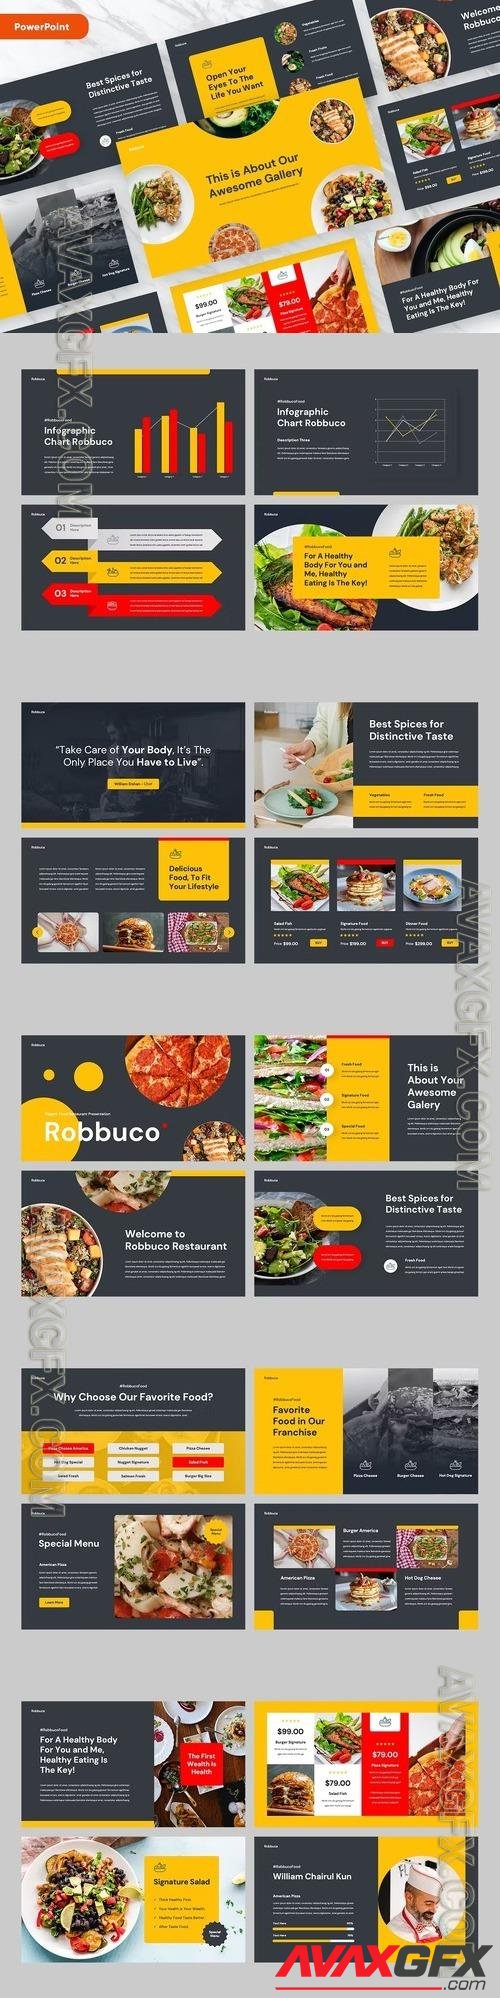 ROBBUCO - Food & Restaurant Powerpoint Template PG2GUP7